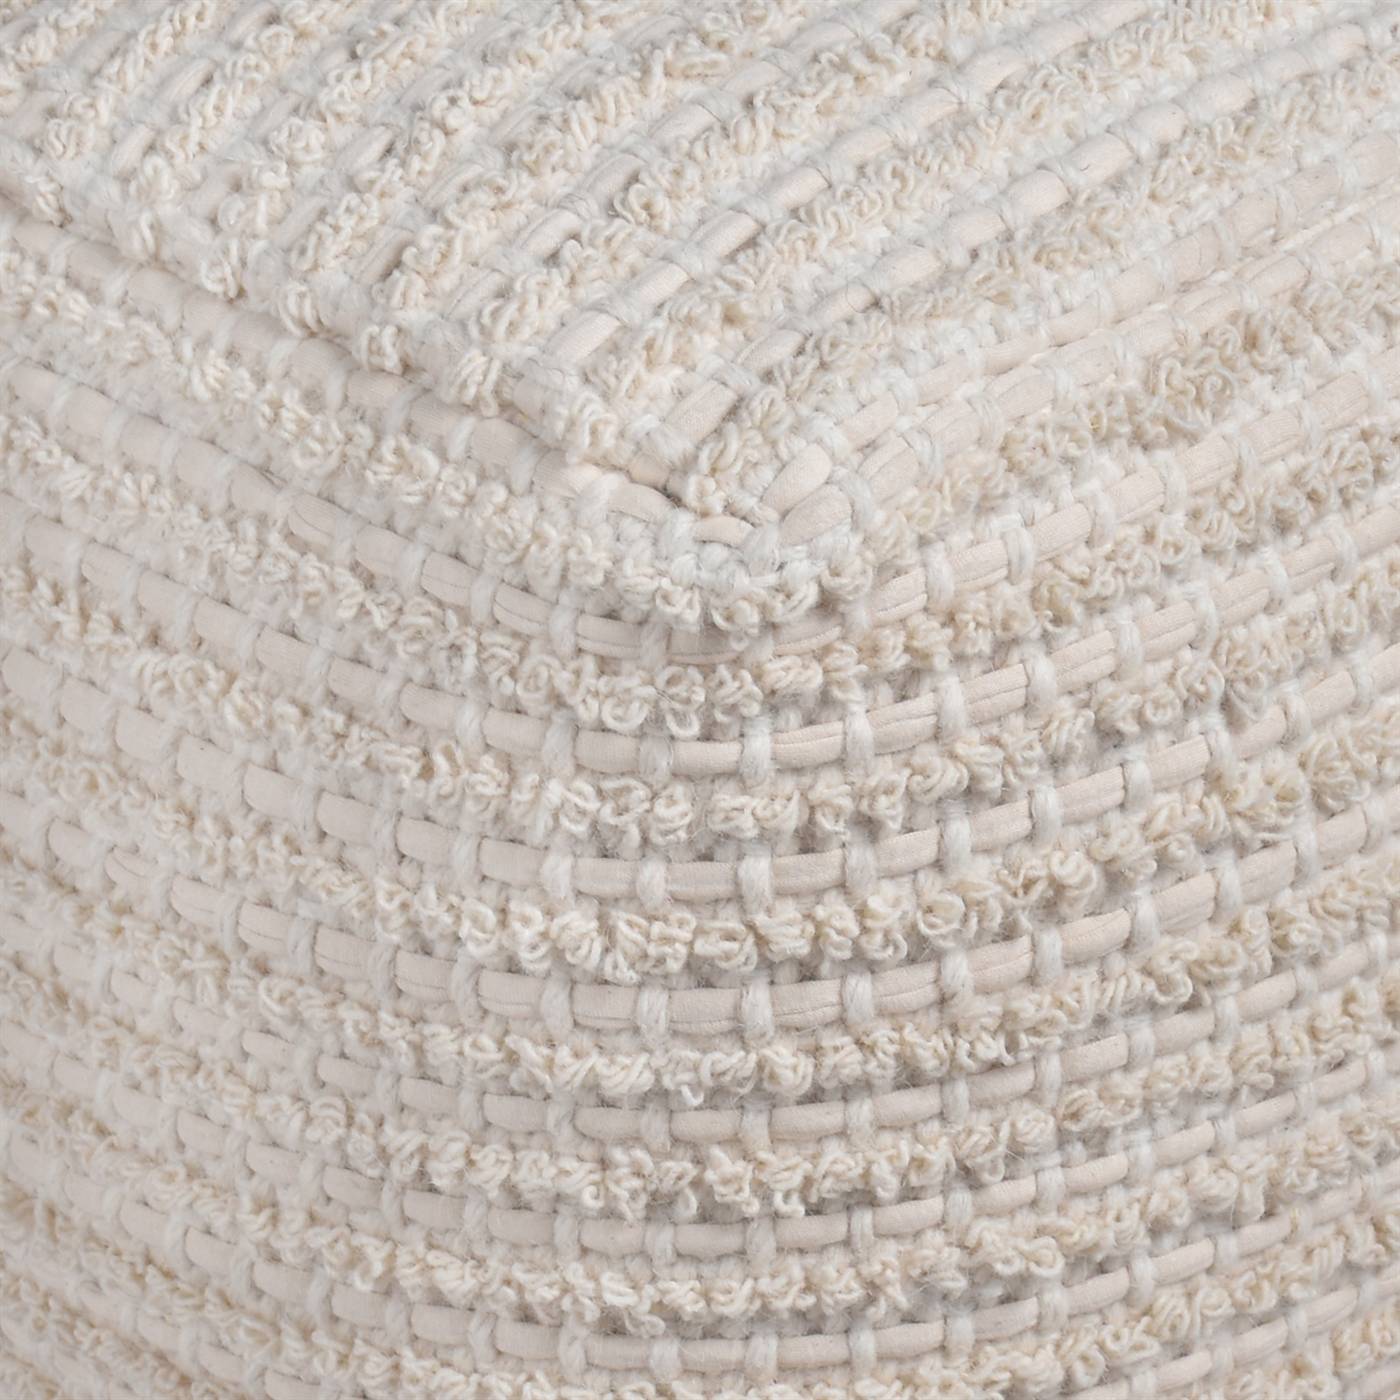 Adonis Pouf, 40x40x40 cm, Natural White, Wool, Cotton, Hand Woven, Pitloom, All Loop